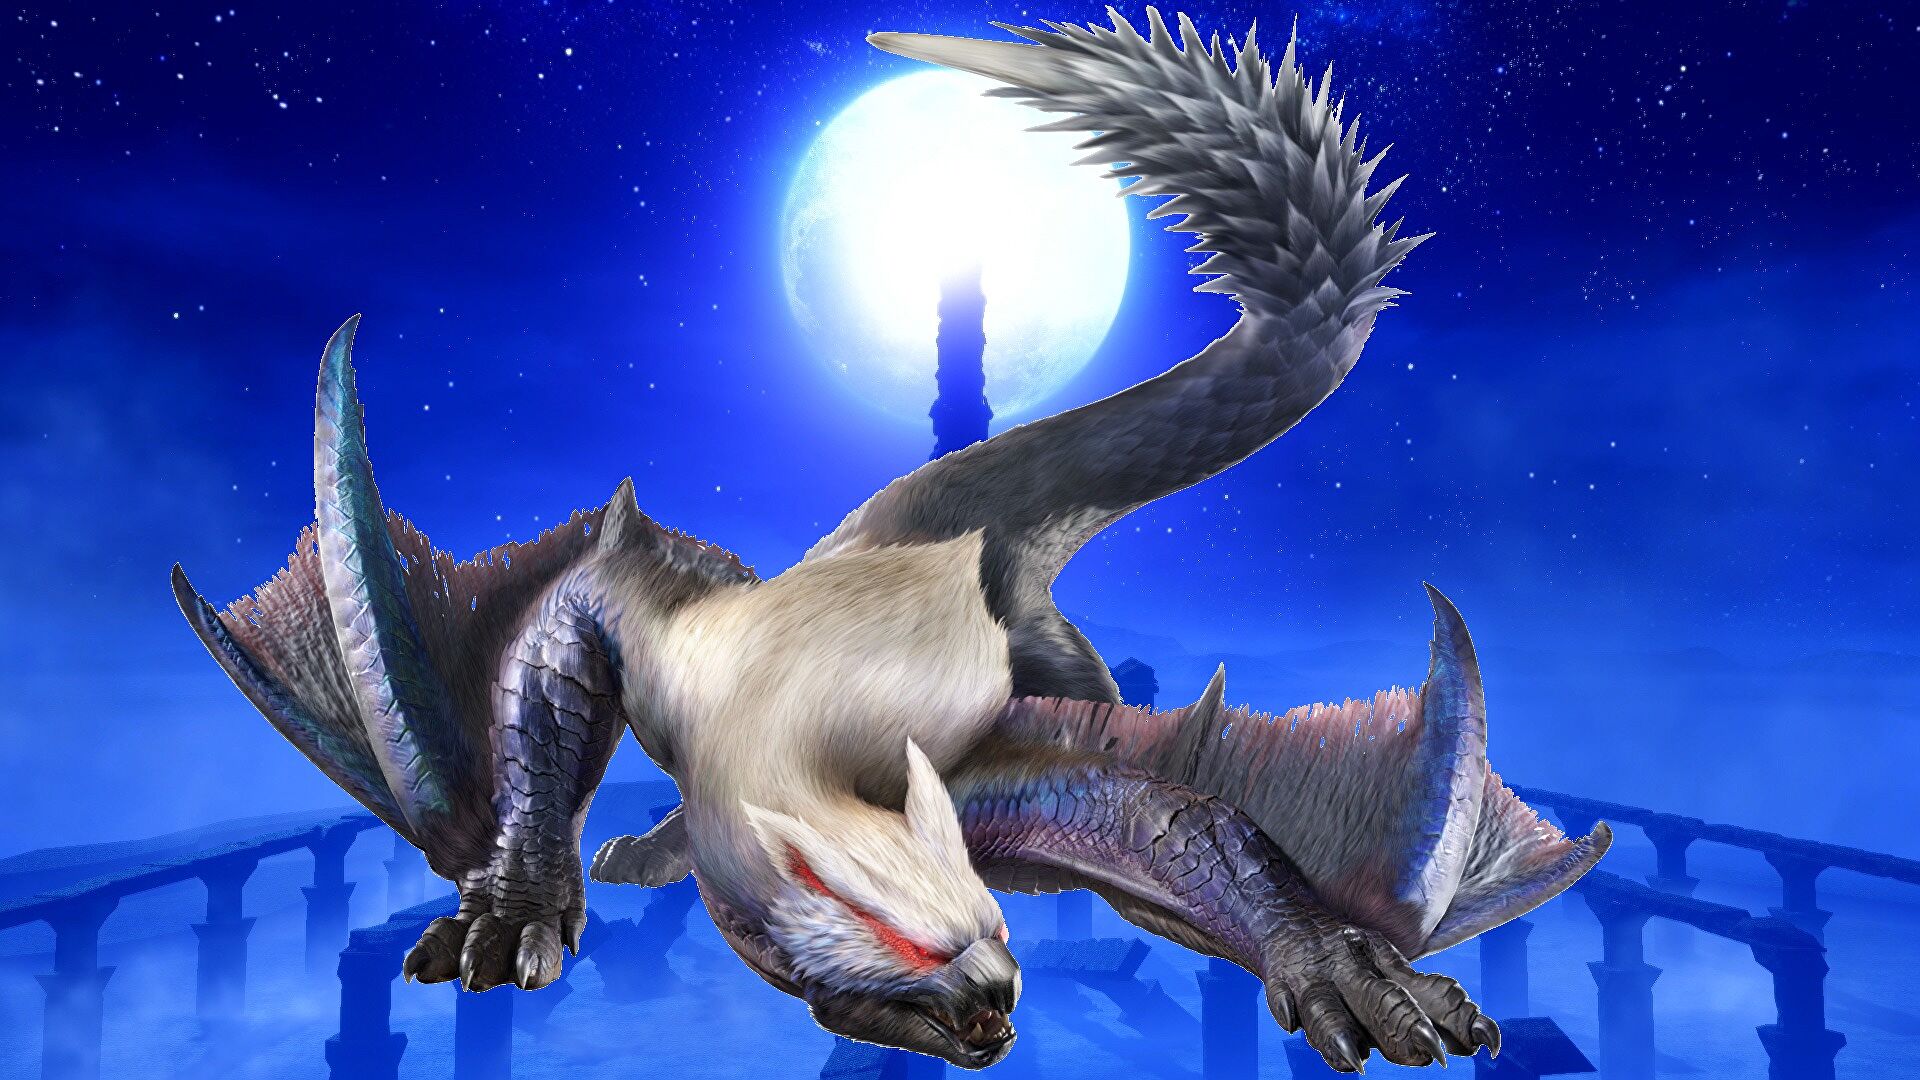 Monster Hunter Rise: Sunbreak's first free update seethes with new beasts to hunt